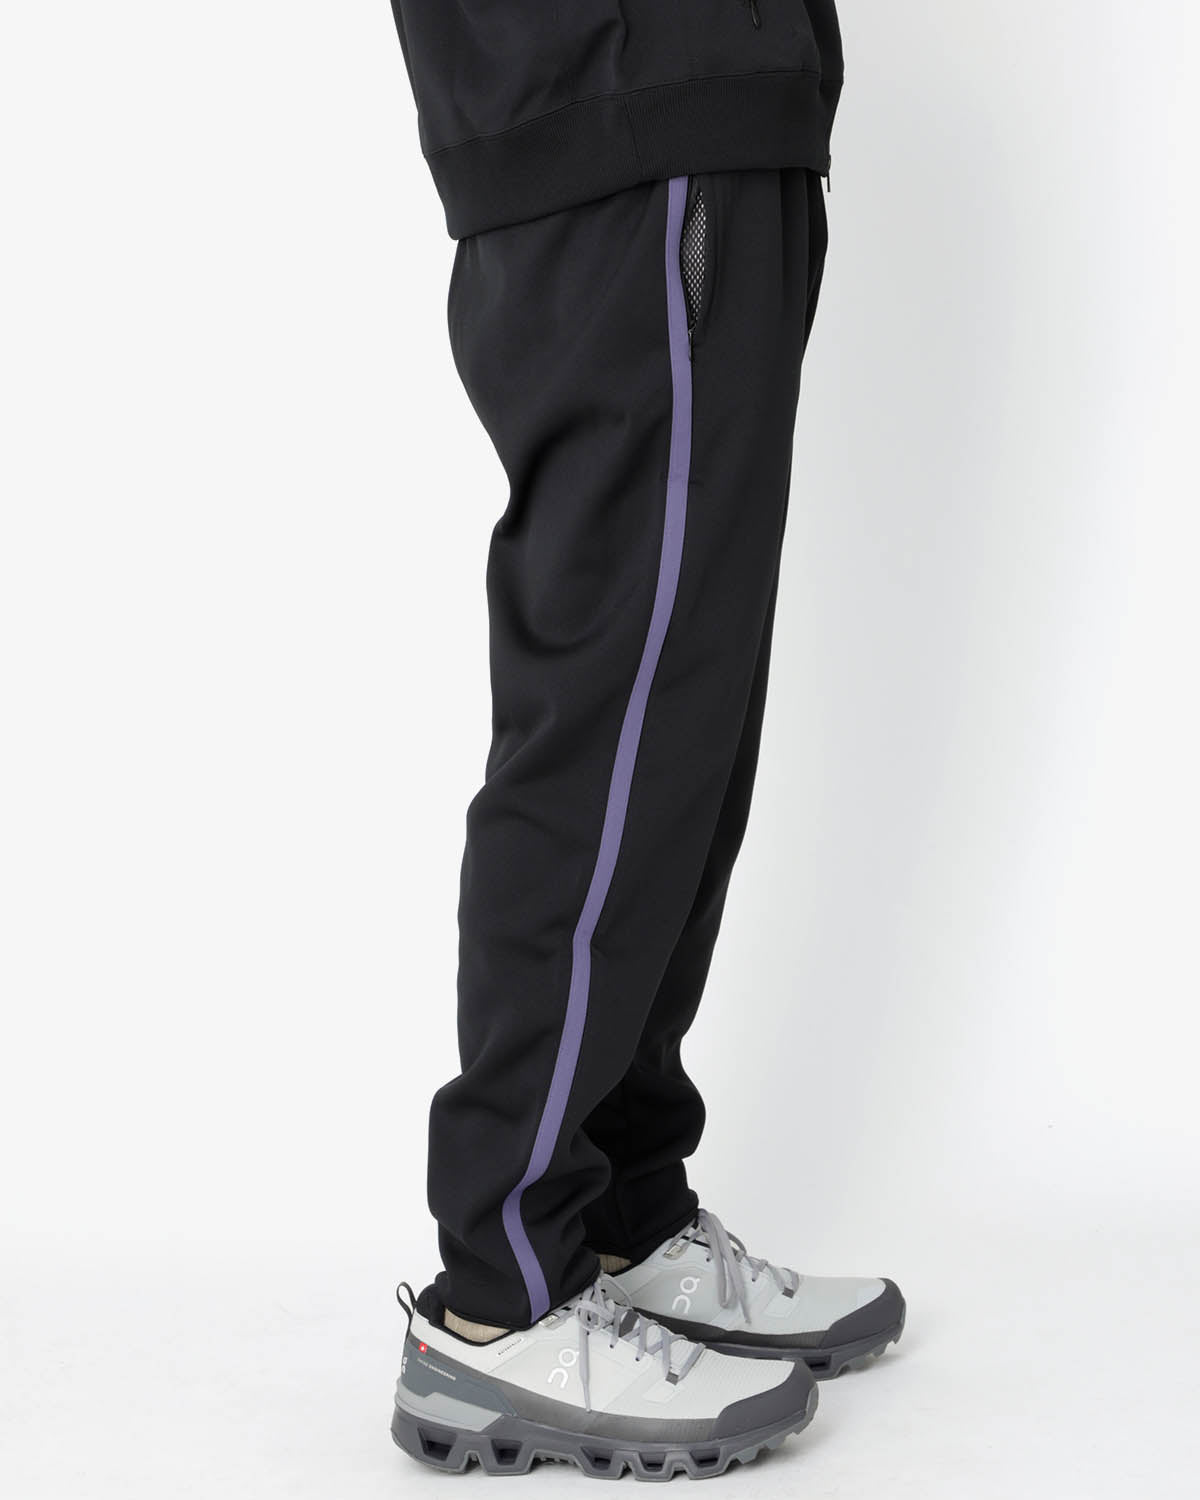 TRAINER PANT - POLY SMOOTH